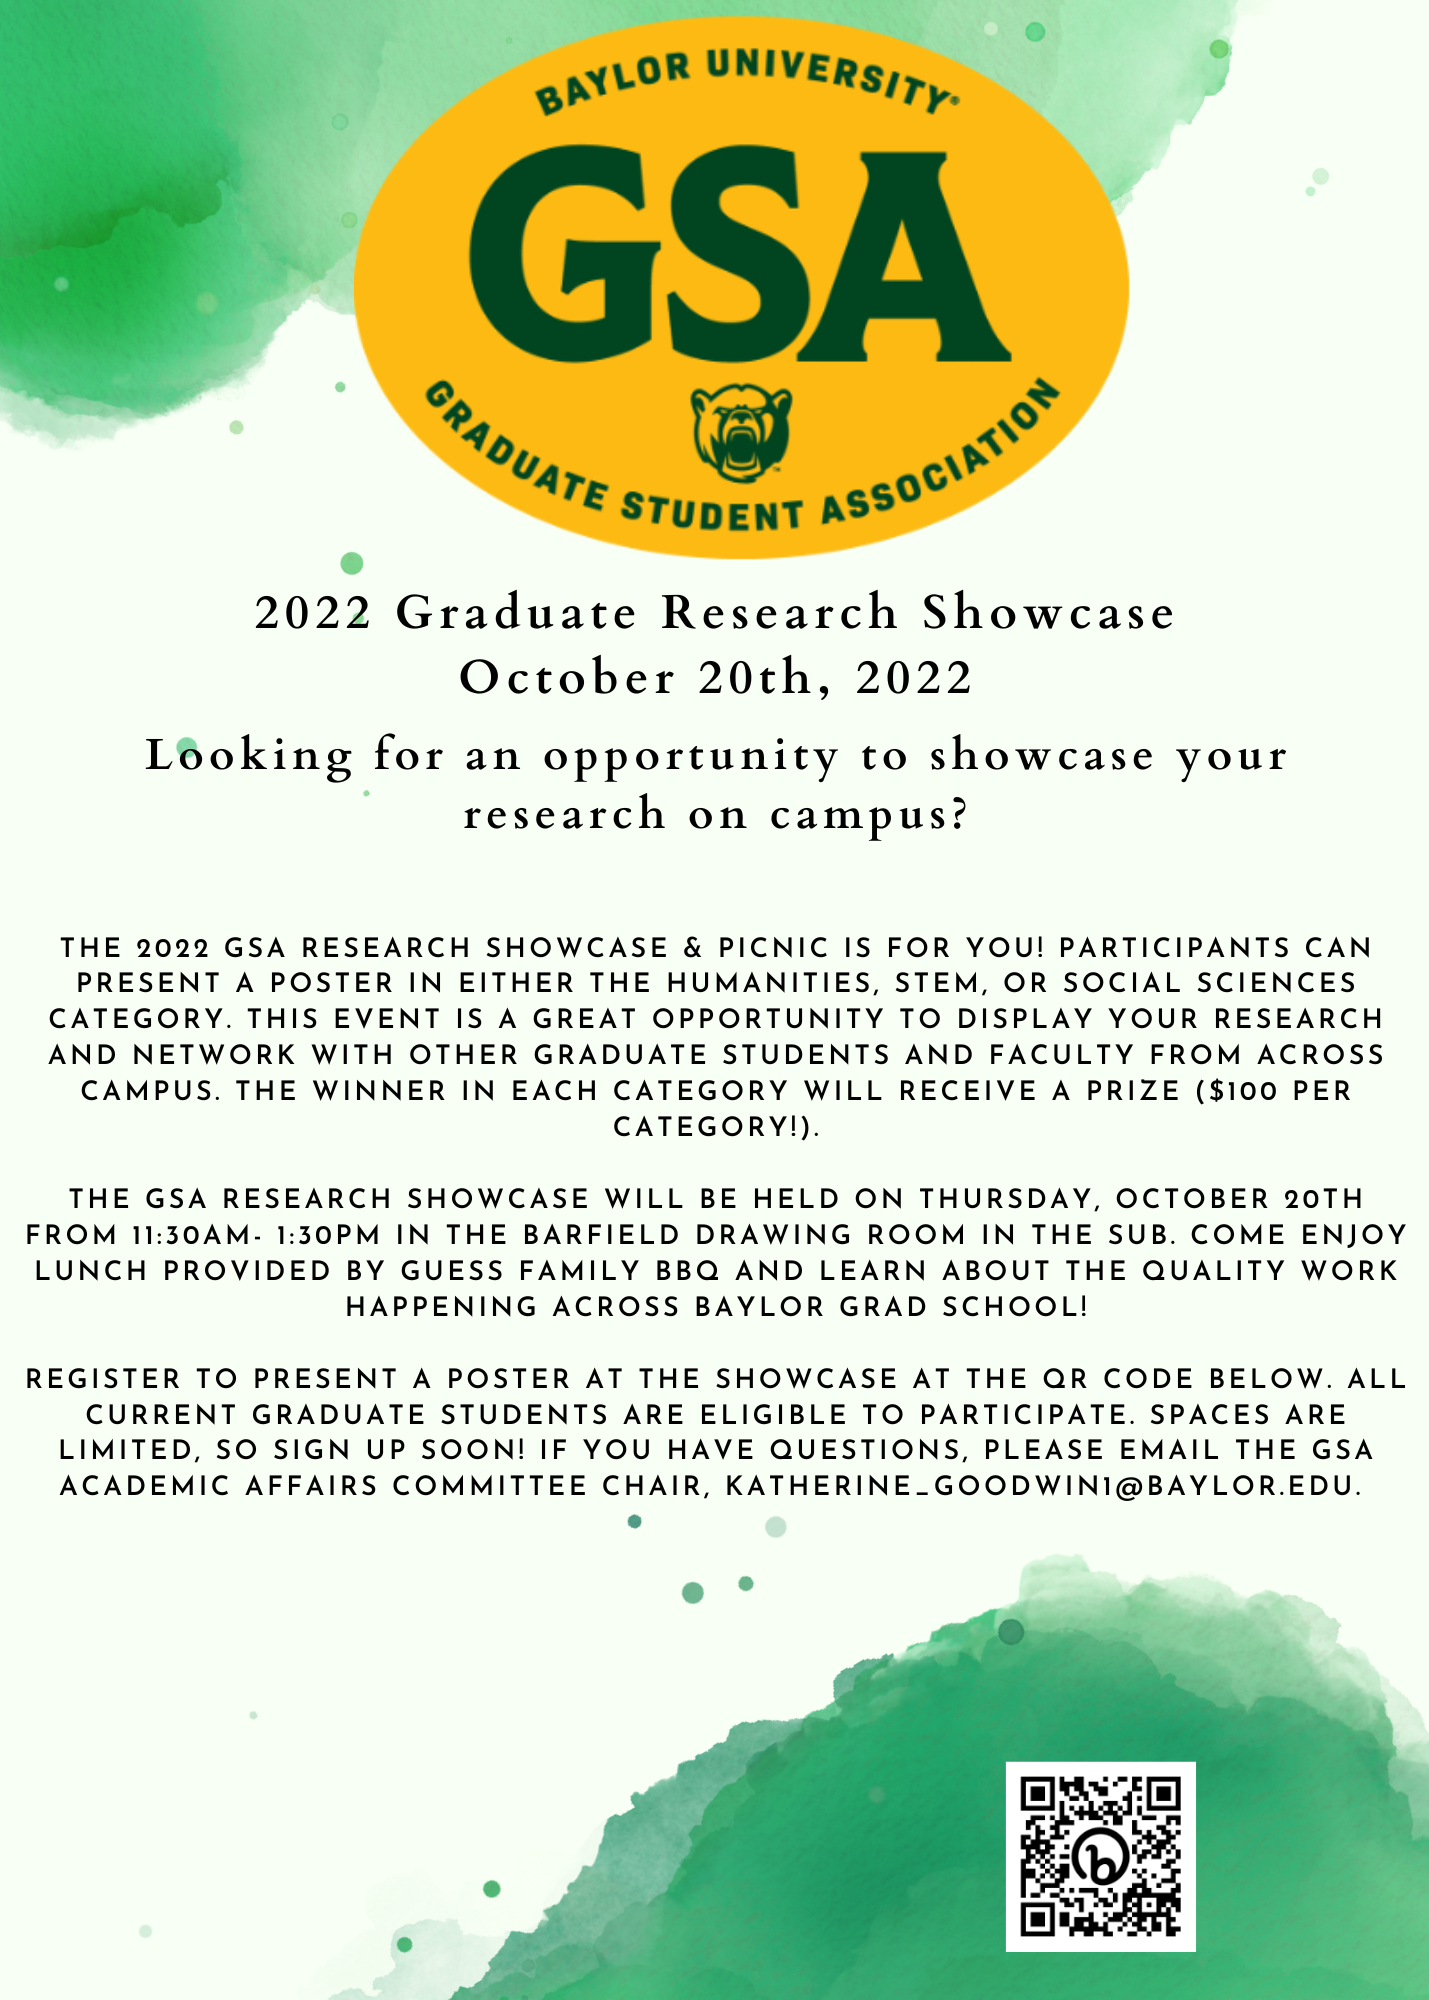 2022 Graduate Research Showcase October 20th, 2022 Looking for an opportunity to showcase your research on campus? The 2022 GSA Research Showcase & Picnic is for you! Participants can present a poster in either the Humanities, STEM, or Social Sciences category. This event is a great opportunity to display your research and network with other graduate students and faculty from across campus. The winner in each category will receive a prize ($100 per category!). The GSA Research Showcase will be held on Thursday, October 20th from 11:30am- 1:30pm in the Barfield Drawing Room in the SUB. Come enjoy lunch provided by Guess Family BBQ and learn about the quality work happening across Baylor Grad School! Register to present a poster at the showcase at https://bit.ly/3y4qV4J or at the QR code below. All current graduate students are eligible to participate. Spaces are limited, so sign up soon! If you have questions, please email the GSA Academic Affairs Committee Chair, Katherine_Goodwin1@baylor.edu. 